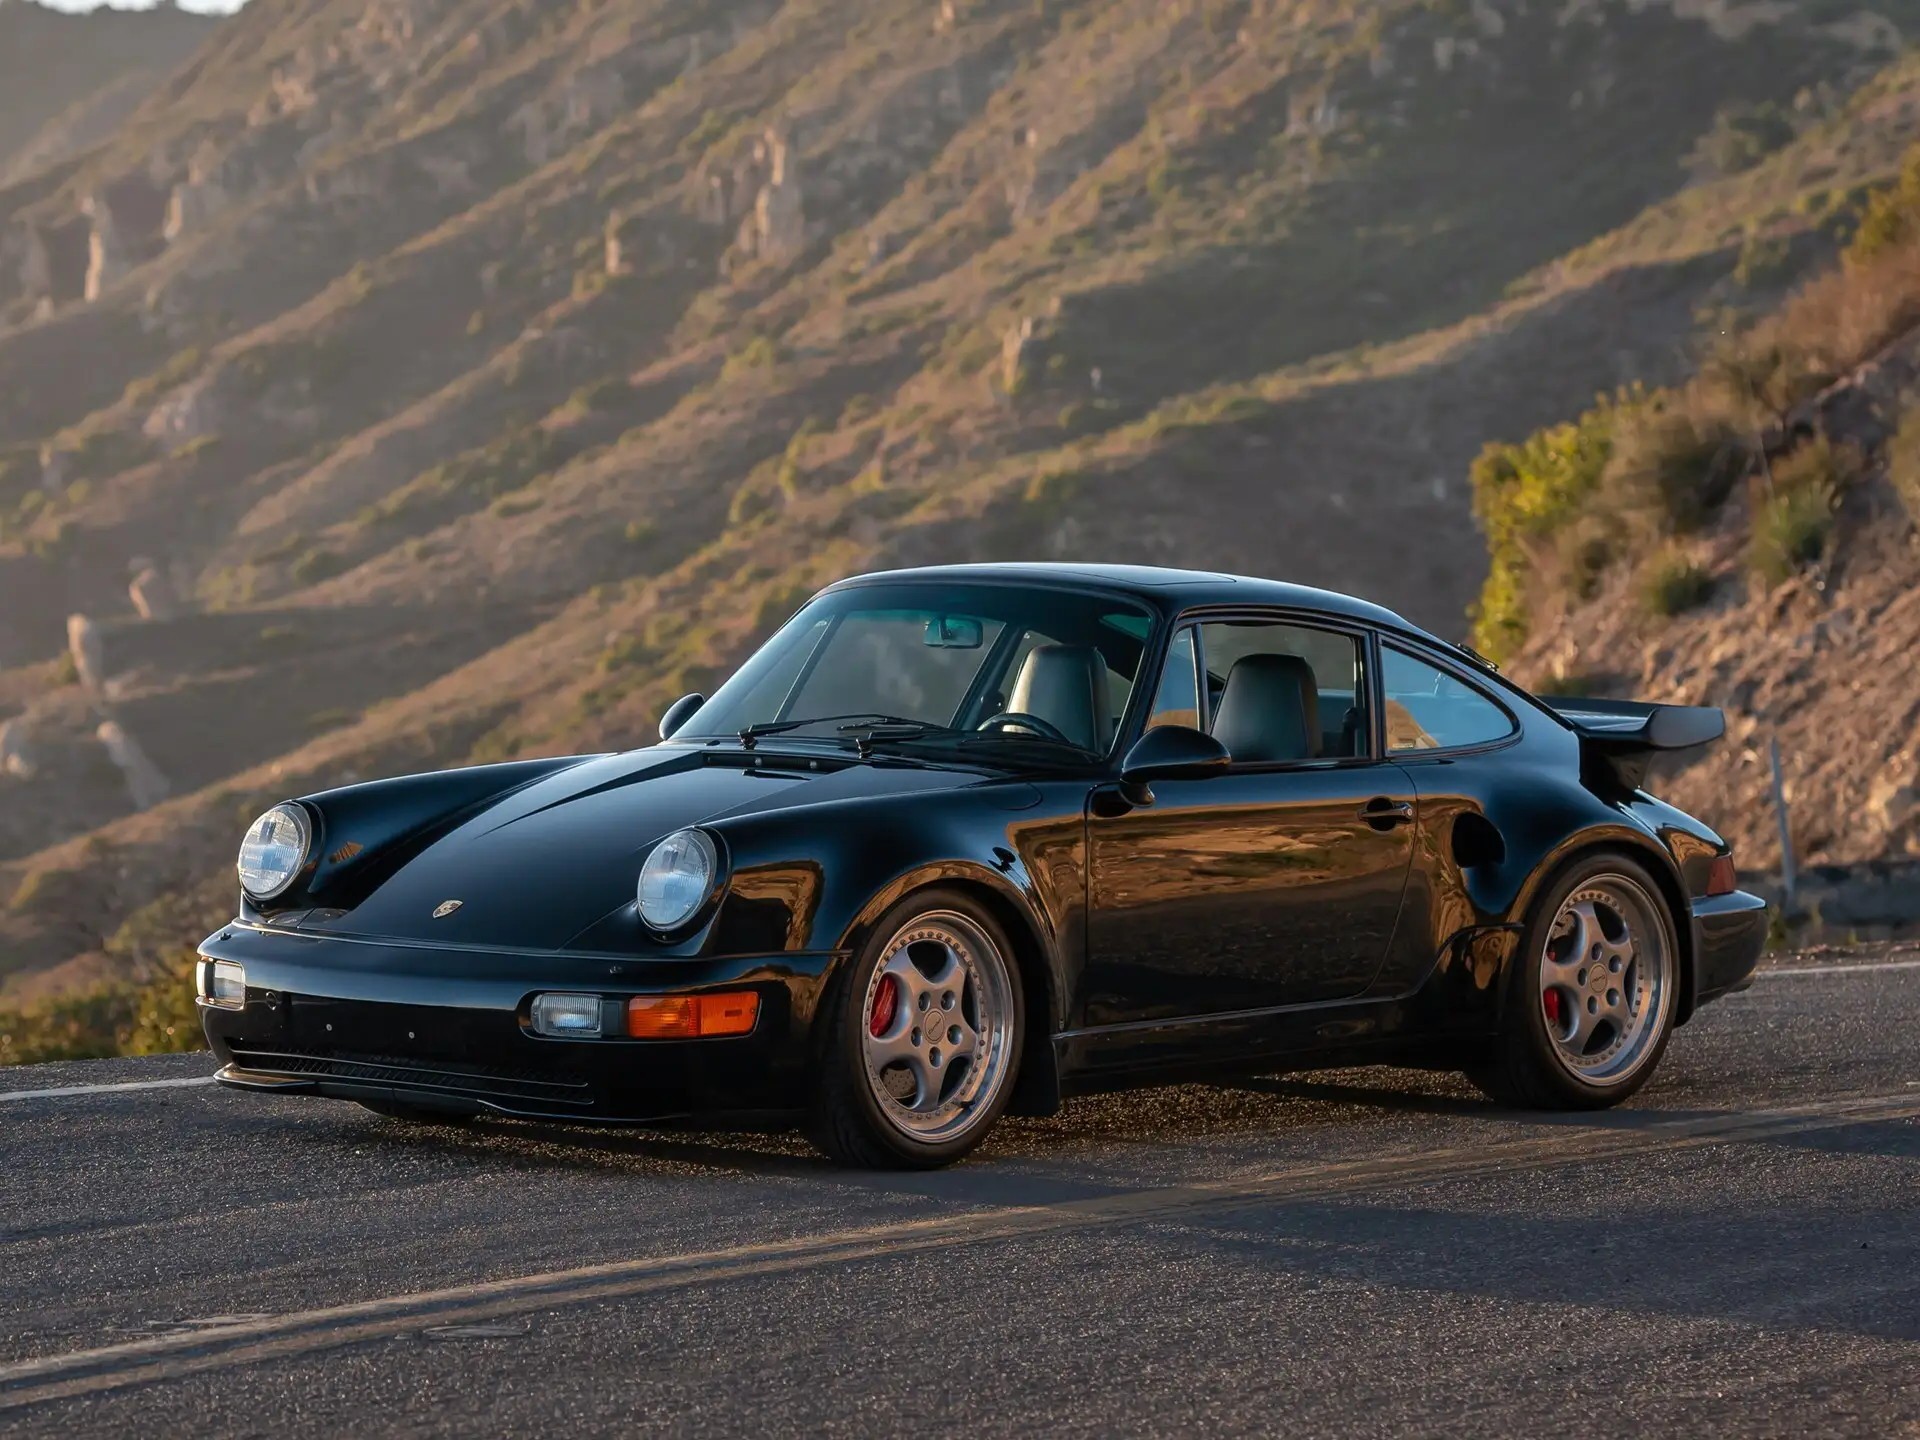 Ultra Rare Triple Black 1994 Porsche 911 Turbo S Is A 7 Figure Car Every Day Of The Week